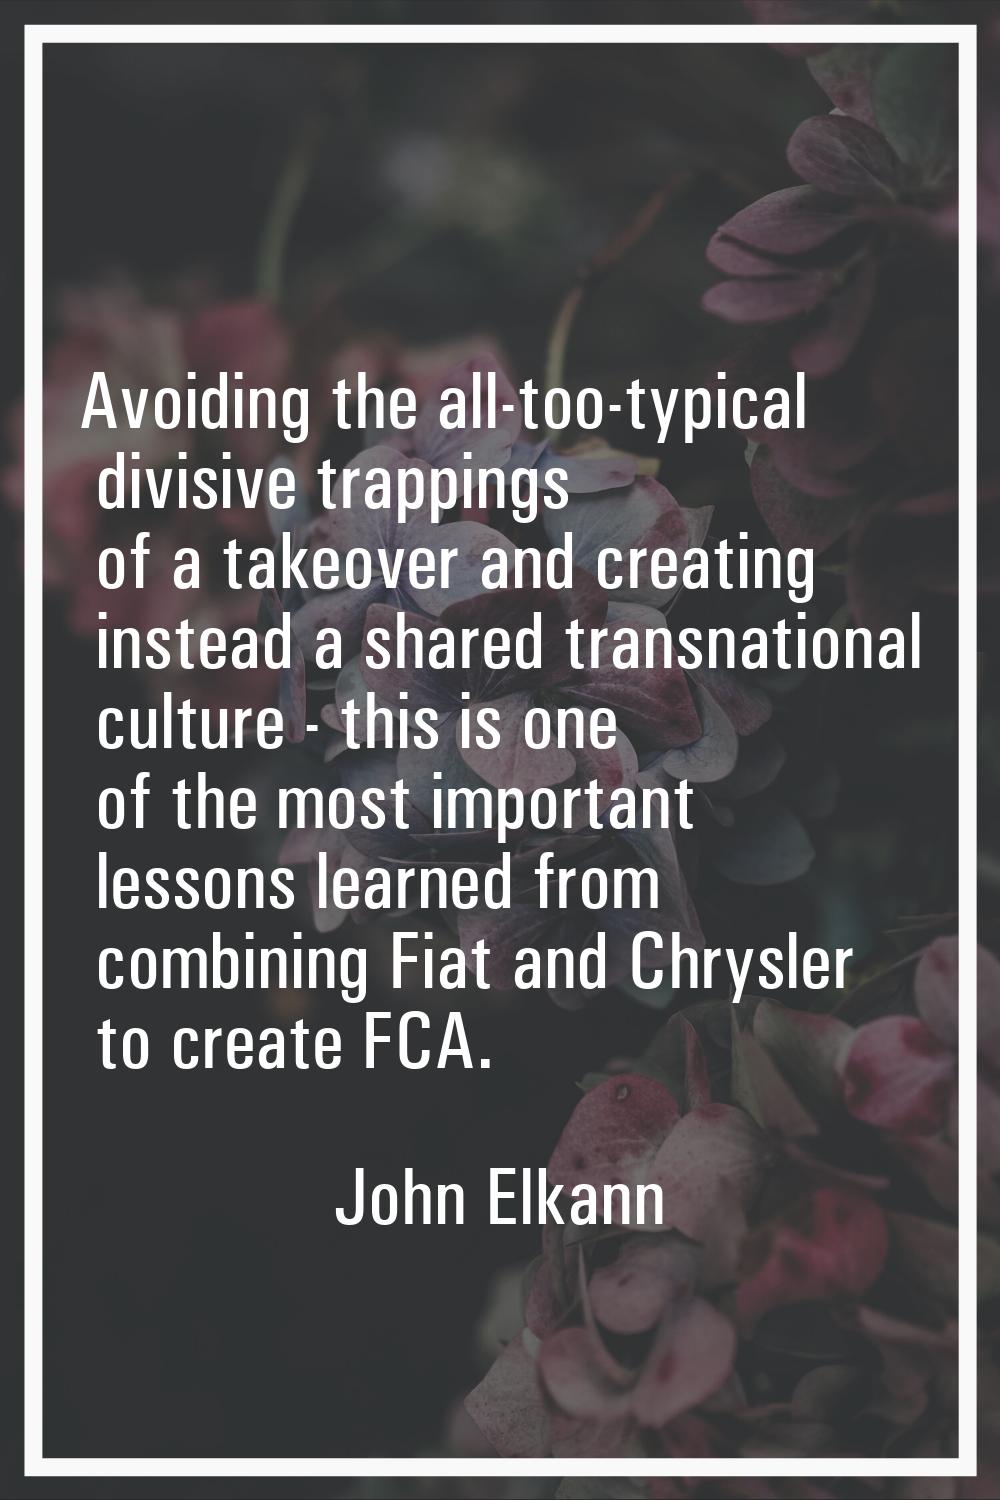 Avoiding the all-too-typical divisive trappings of a takeover and creating instead a shared transna